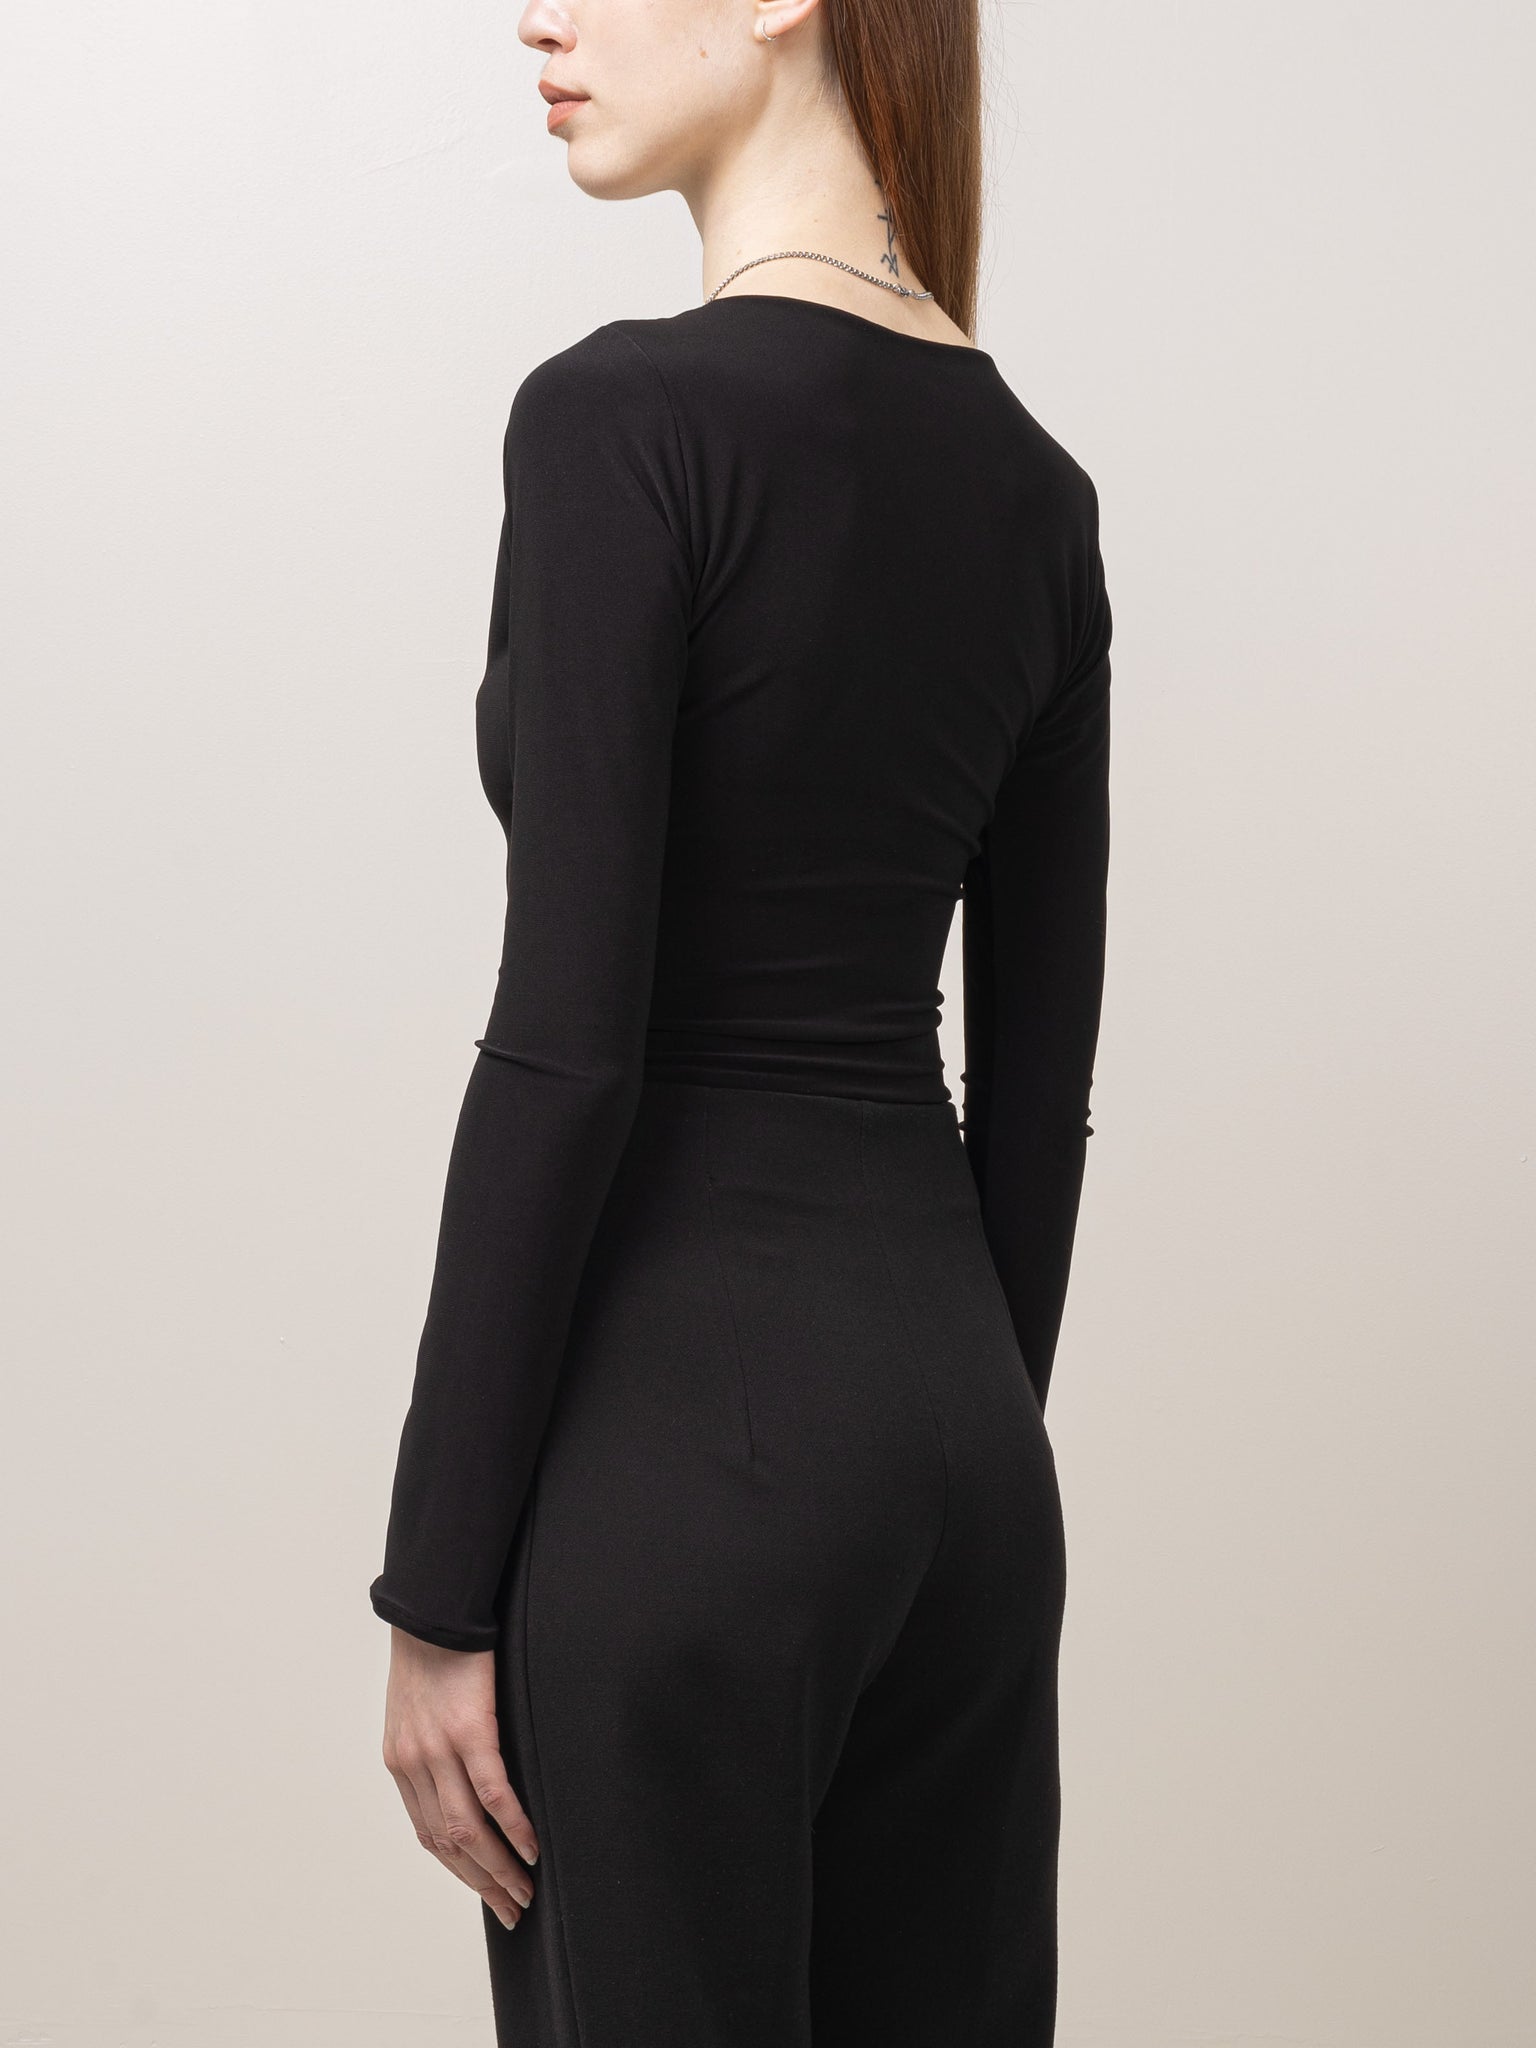 Fitted long sleeve top with cut out details at the front.